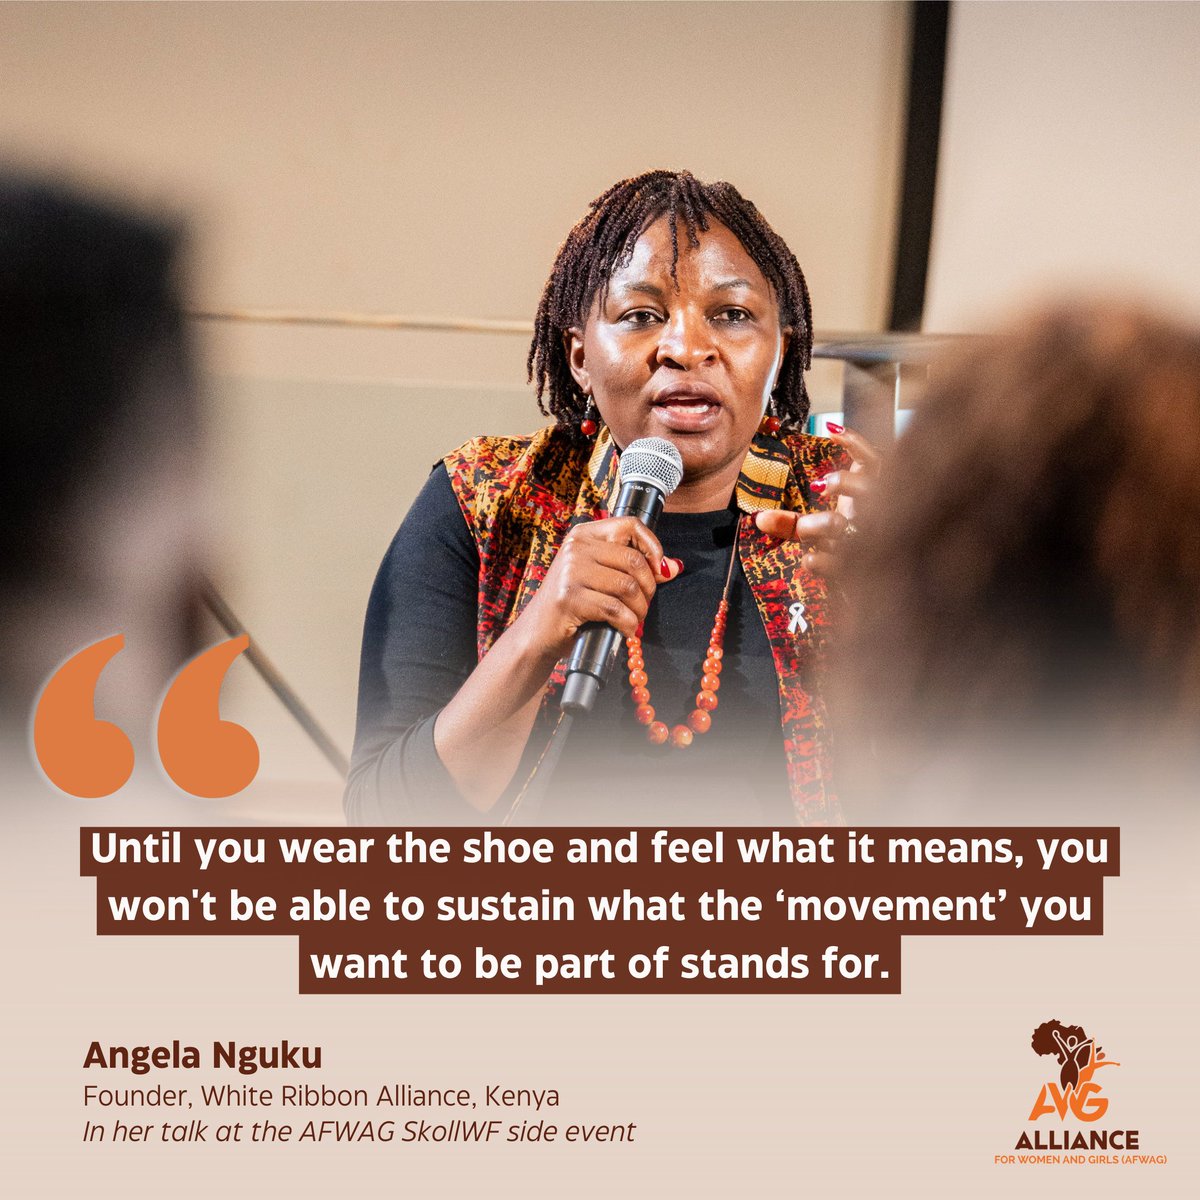 @angienguku  the esteemed Founder of @WRA_K, captivated the audience at the AFWAG SkollWF side event with a deeply moving address about how personal experience of struggle and triumph can serve as the bedrock for enduring advocacy efforts.